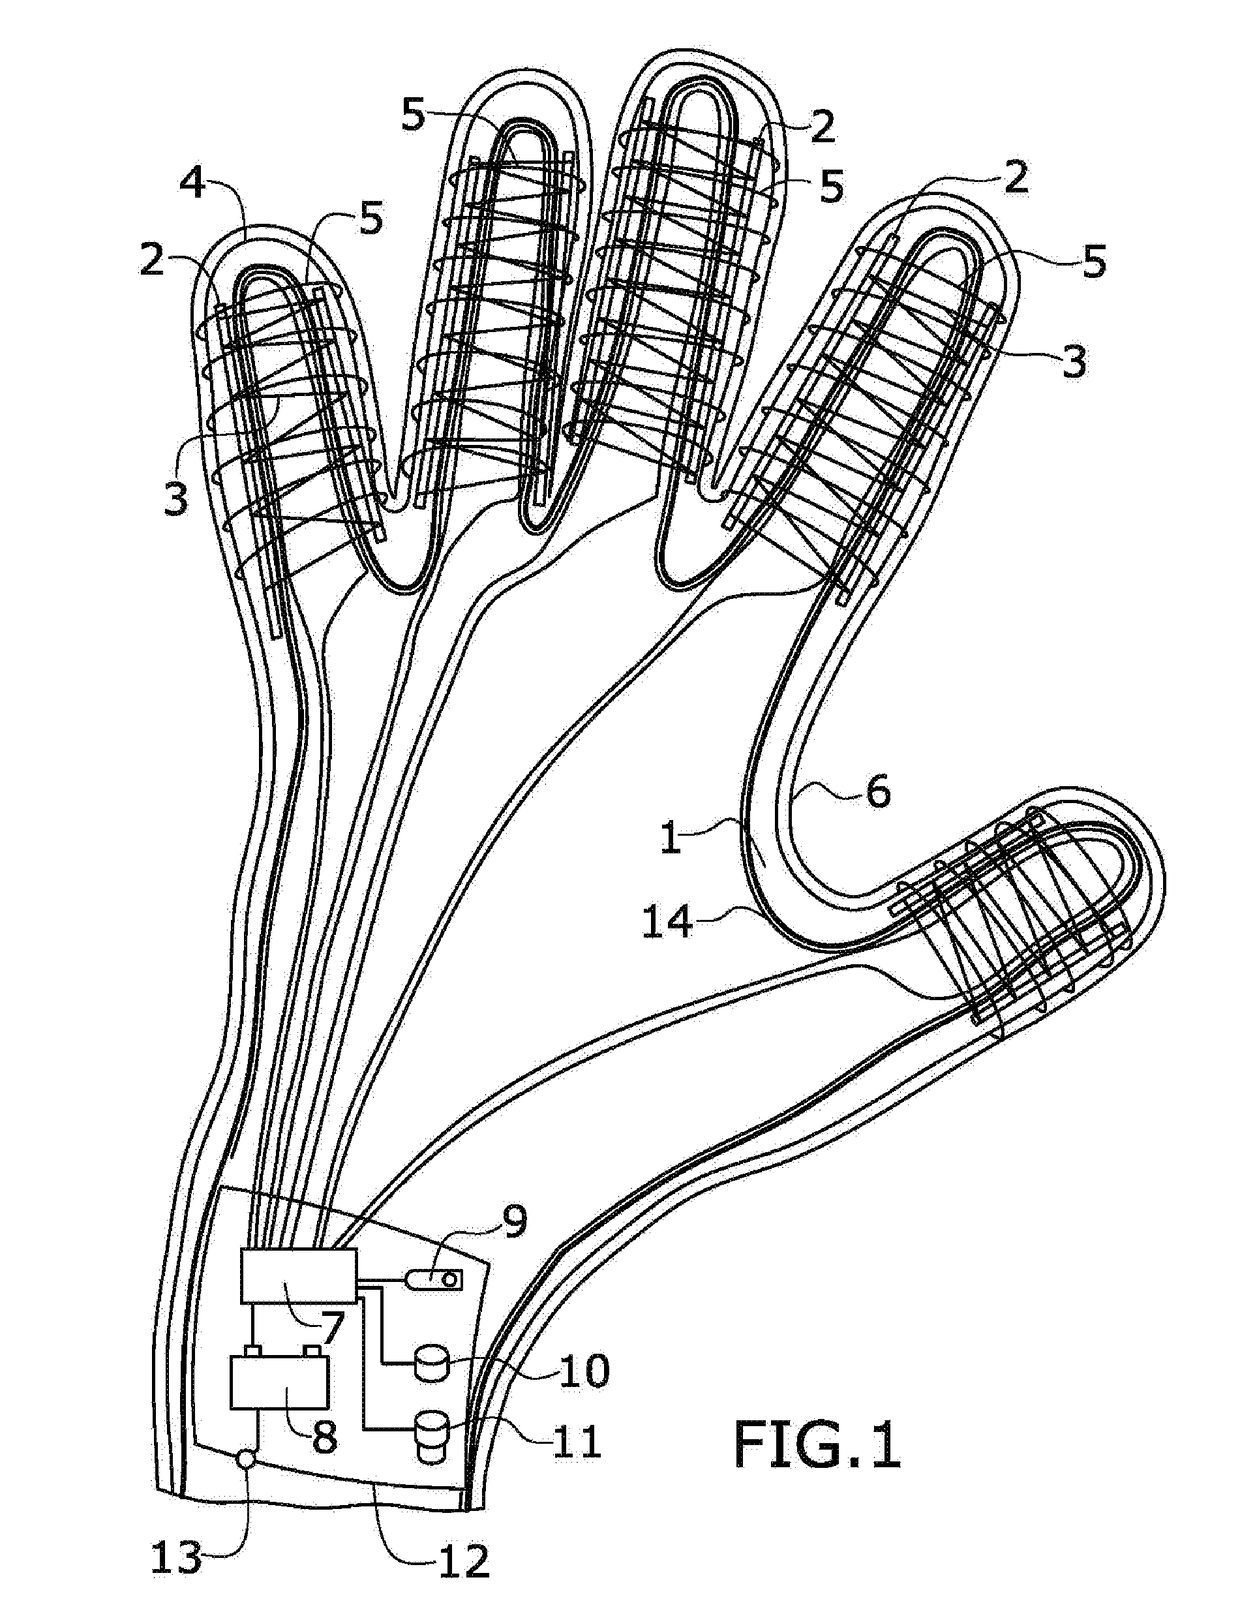 Device for treating arthritis and osteoarthritis in extremities and chronic inflammations and for reducing muscular pain and tension